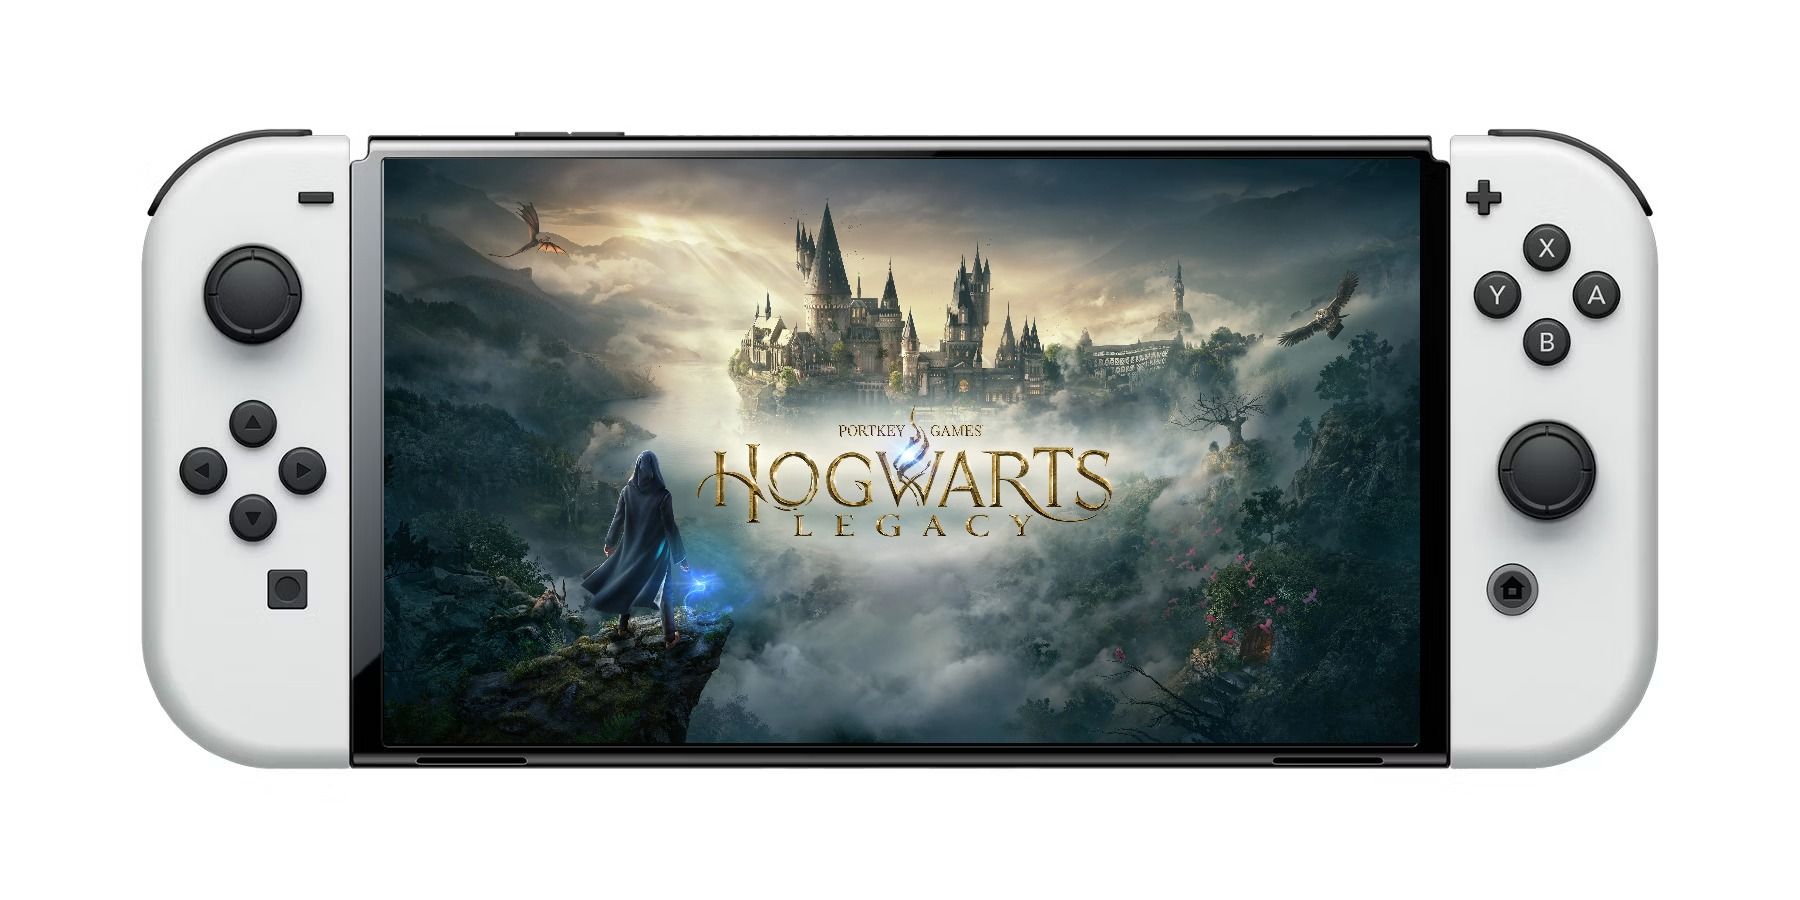  Hogwarts Legacy - For Nintendo Switch : Video Games